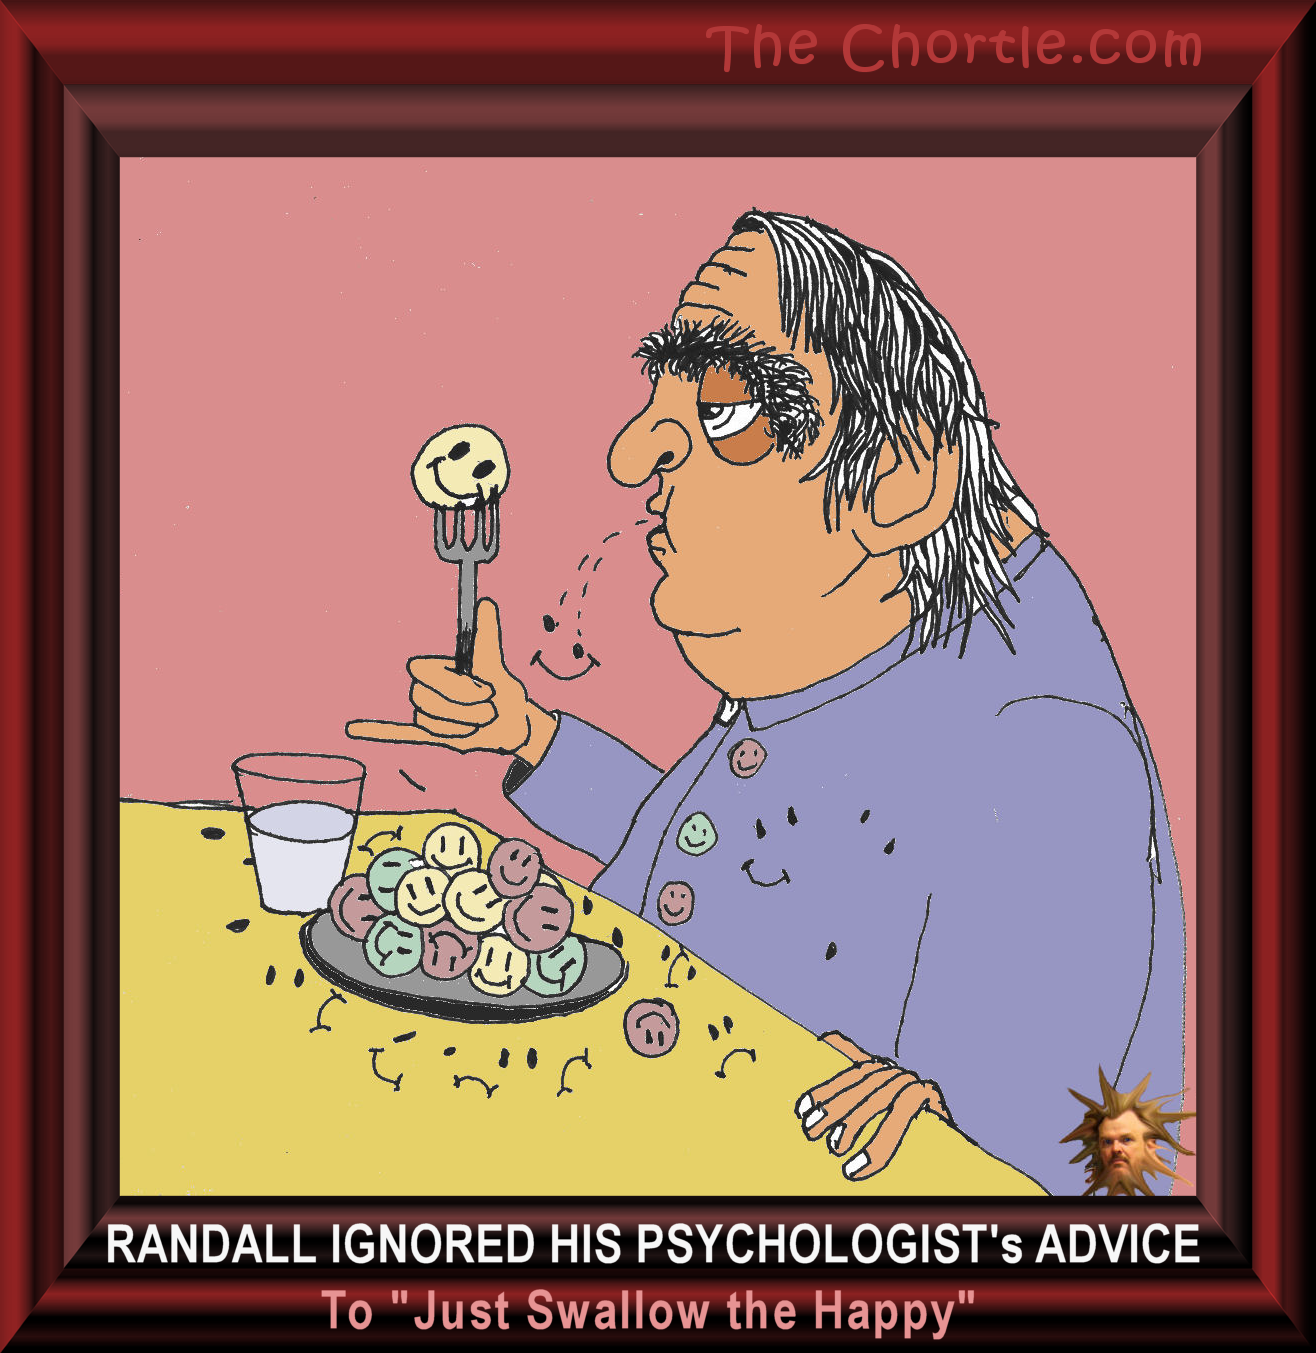 Randall ignored his psychologist's advice to "Just swallow the happy."